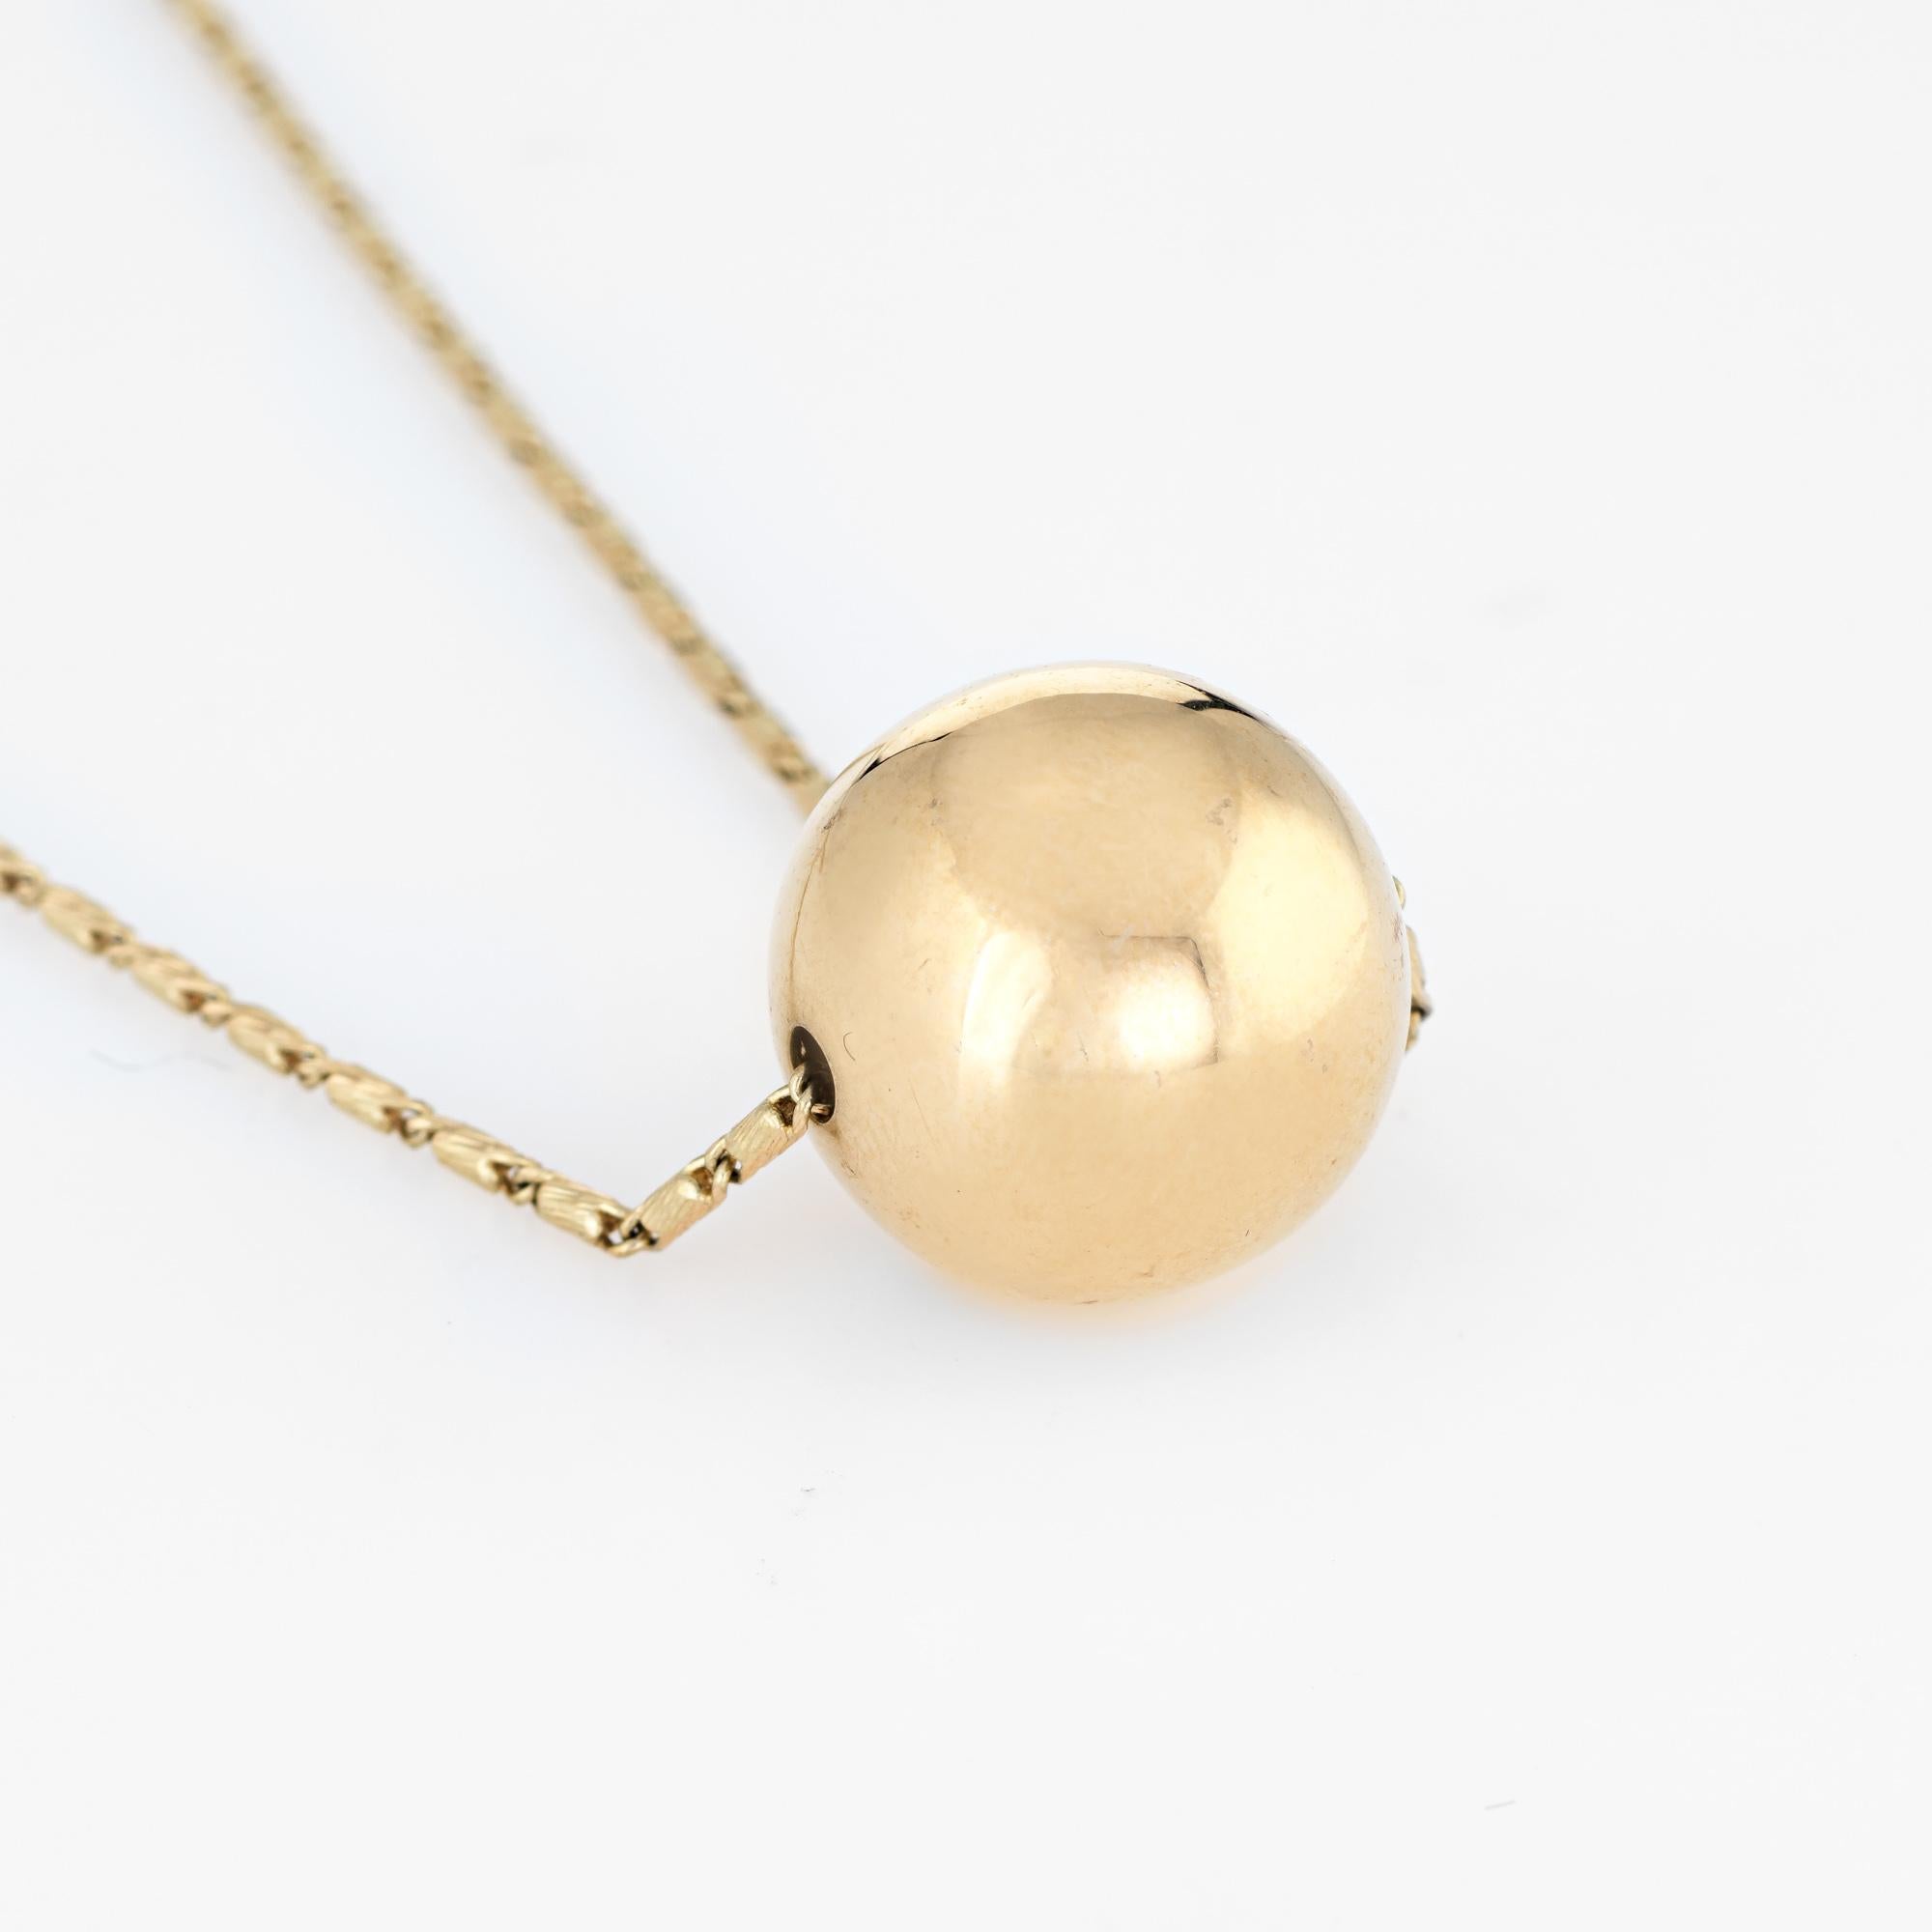 Elegant and finely detailed vintage orb necklace (circa 1970s to 1980s), crafted in 14 karat yellow gold.  

The necklace measures 17 inches in length and sits nicely below the nape of the necklace. The orb measures 14mm (0.55 inches). The necklace